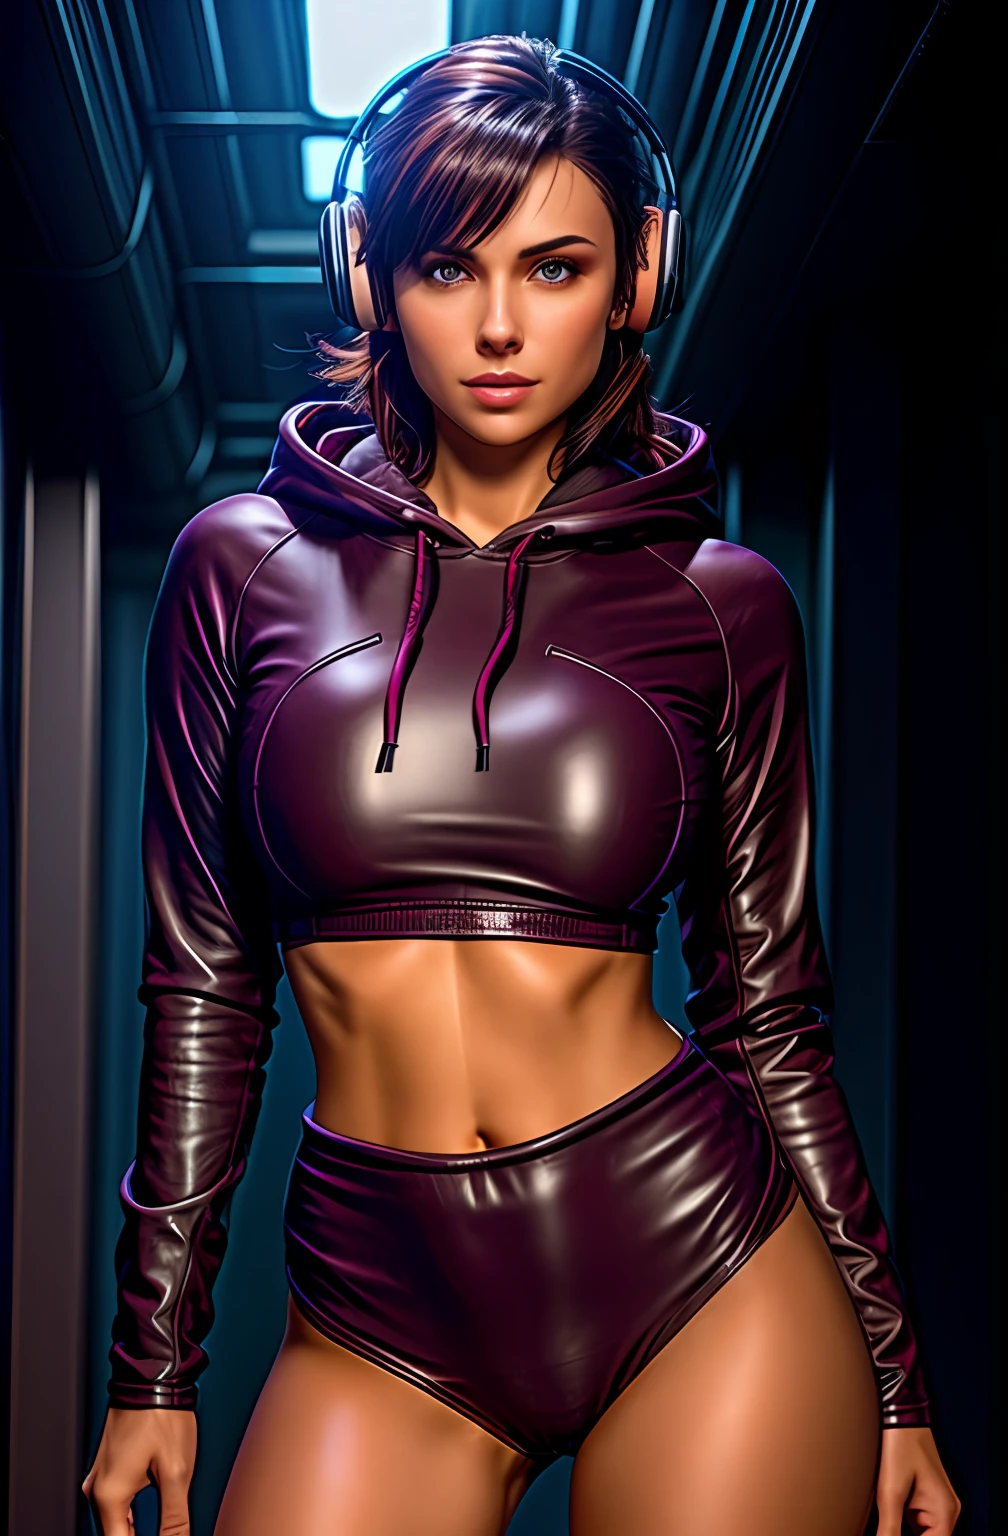 dark brown haired gamer girl leaning into the camera, photo from front above, dark red hoodie, large leather gamer headphones, medium breasts, skintight black top:1.2, cleavage, purple bra:1.2, looking at viewer, soft colors, cinematic lighting, perfect anatomy:1.2, round breasts:1.2, well-organized, neat:1.2, perfect proportions, smooth clothes